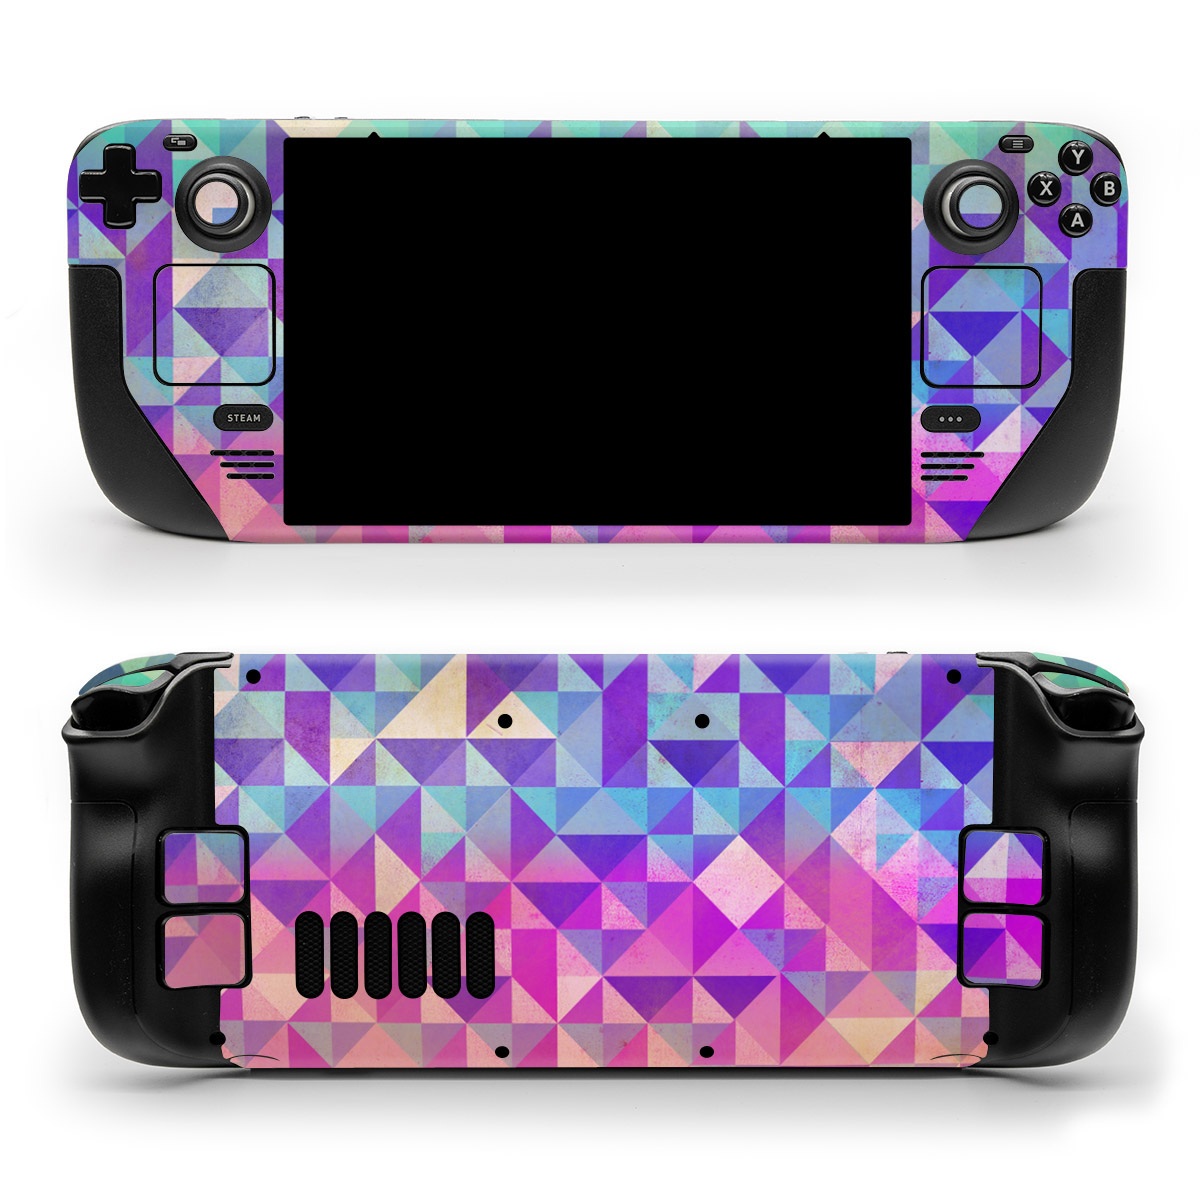 Valve Steam Deck Skin design of Pattern, Purple, Triangle, Violet, Magenta, Line, Design, Symmetry, Psychedelic art, with gray, purple, green, blue, pink colors